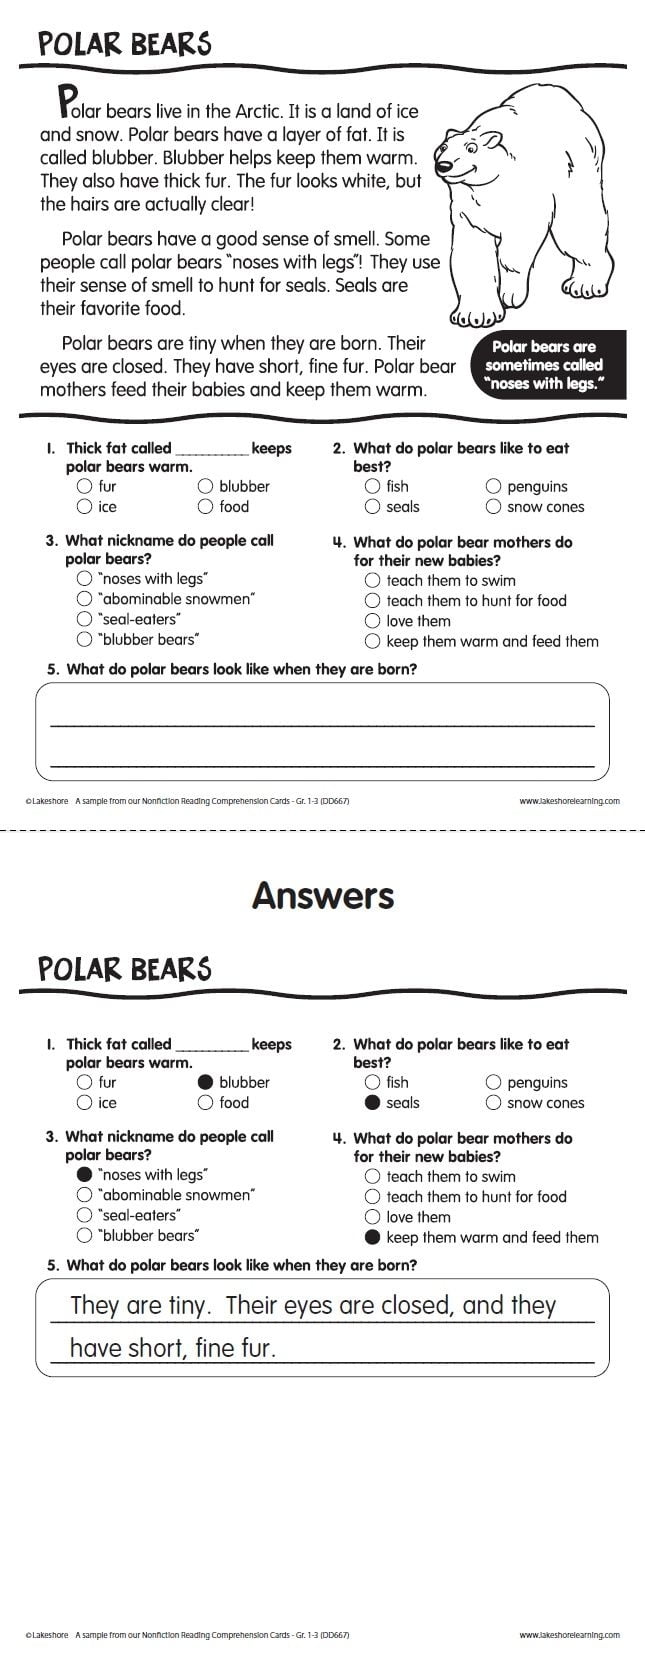 Polar Bears Reading Comprehension Passage From Lakeshore Learning Test Kids Compre Reading Comprehension Passages Reading Comprehension Comprehension Passage